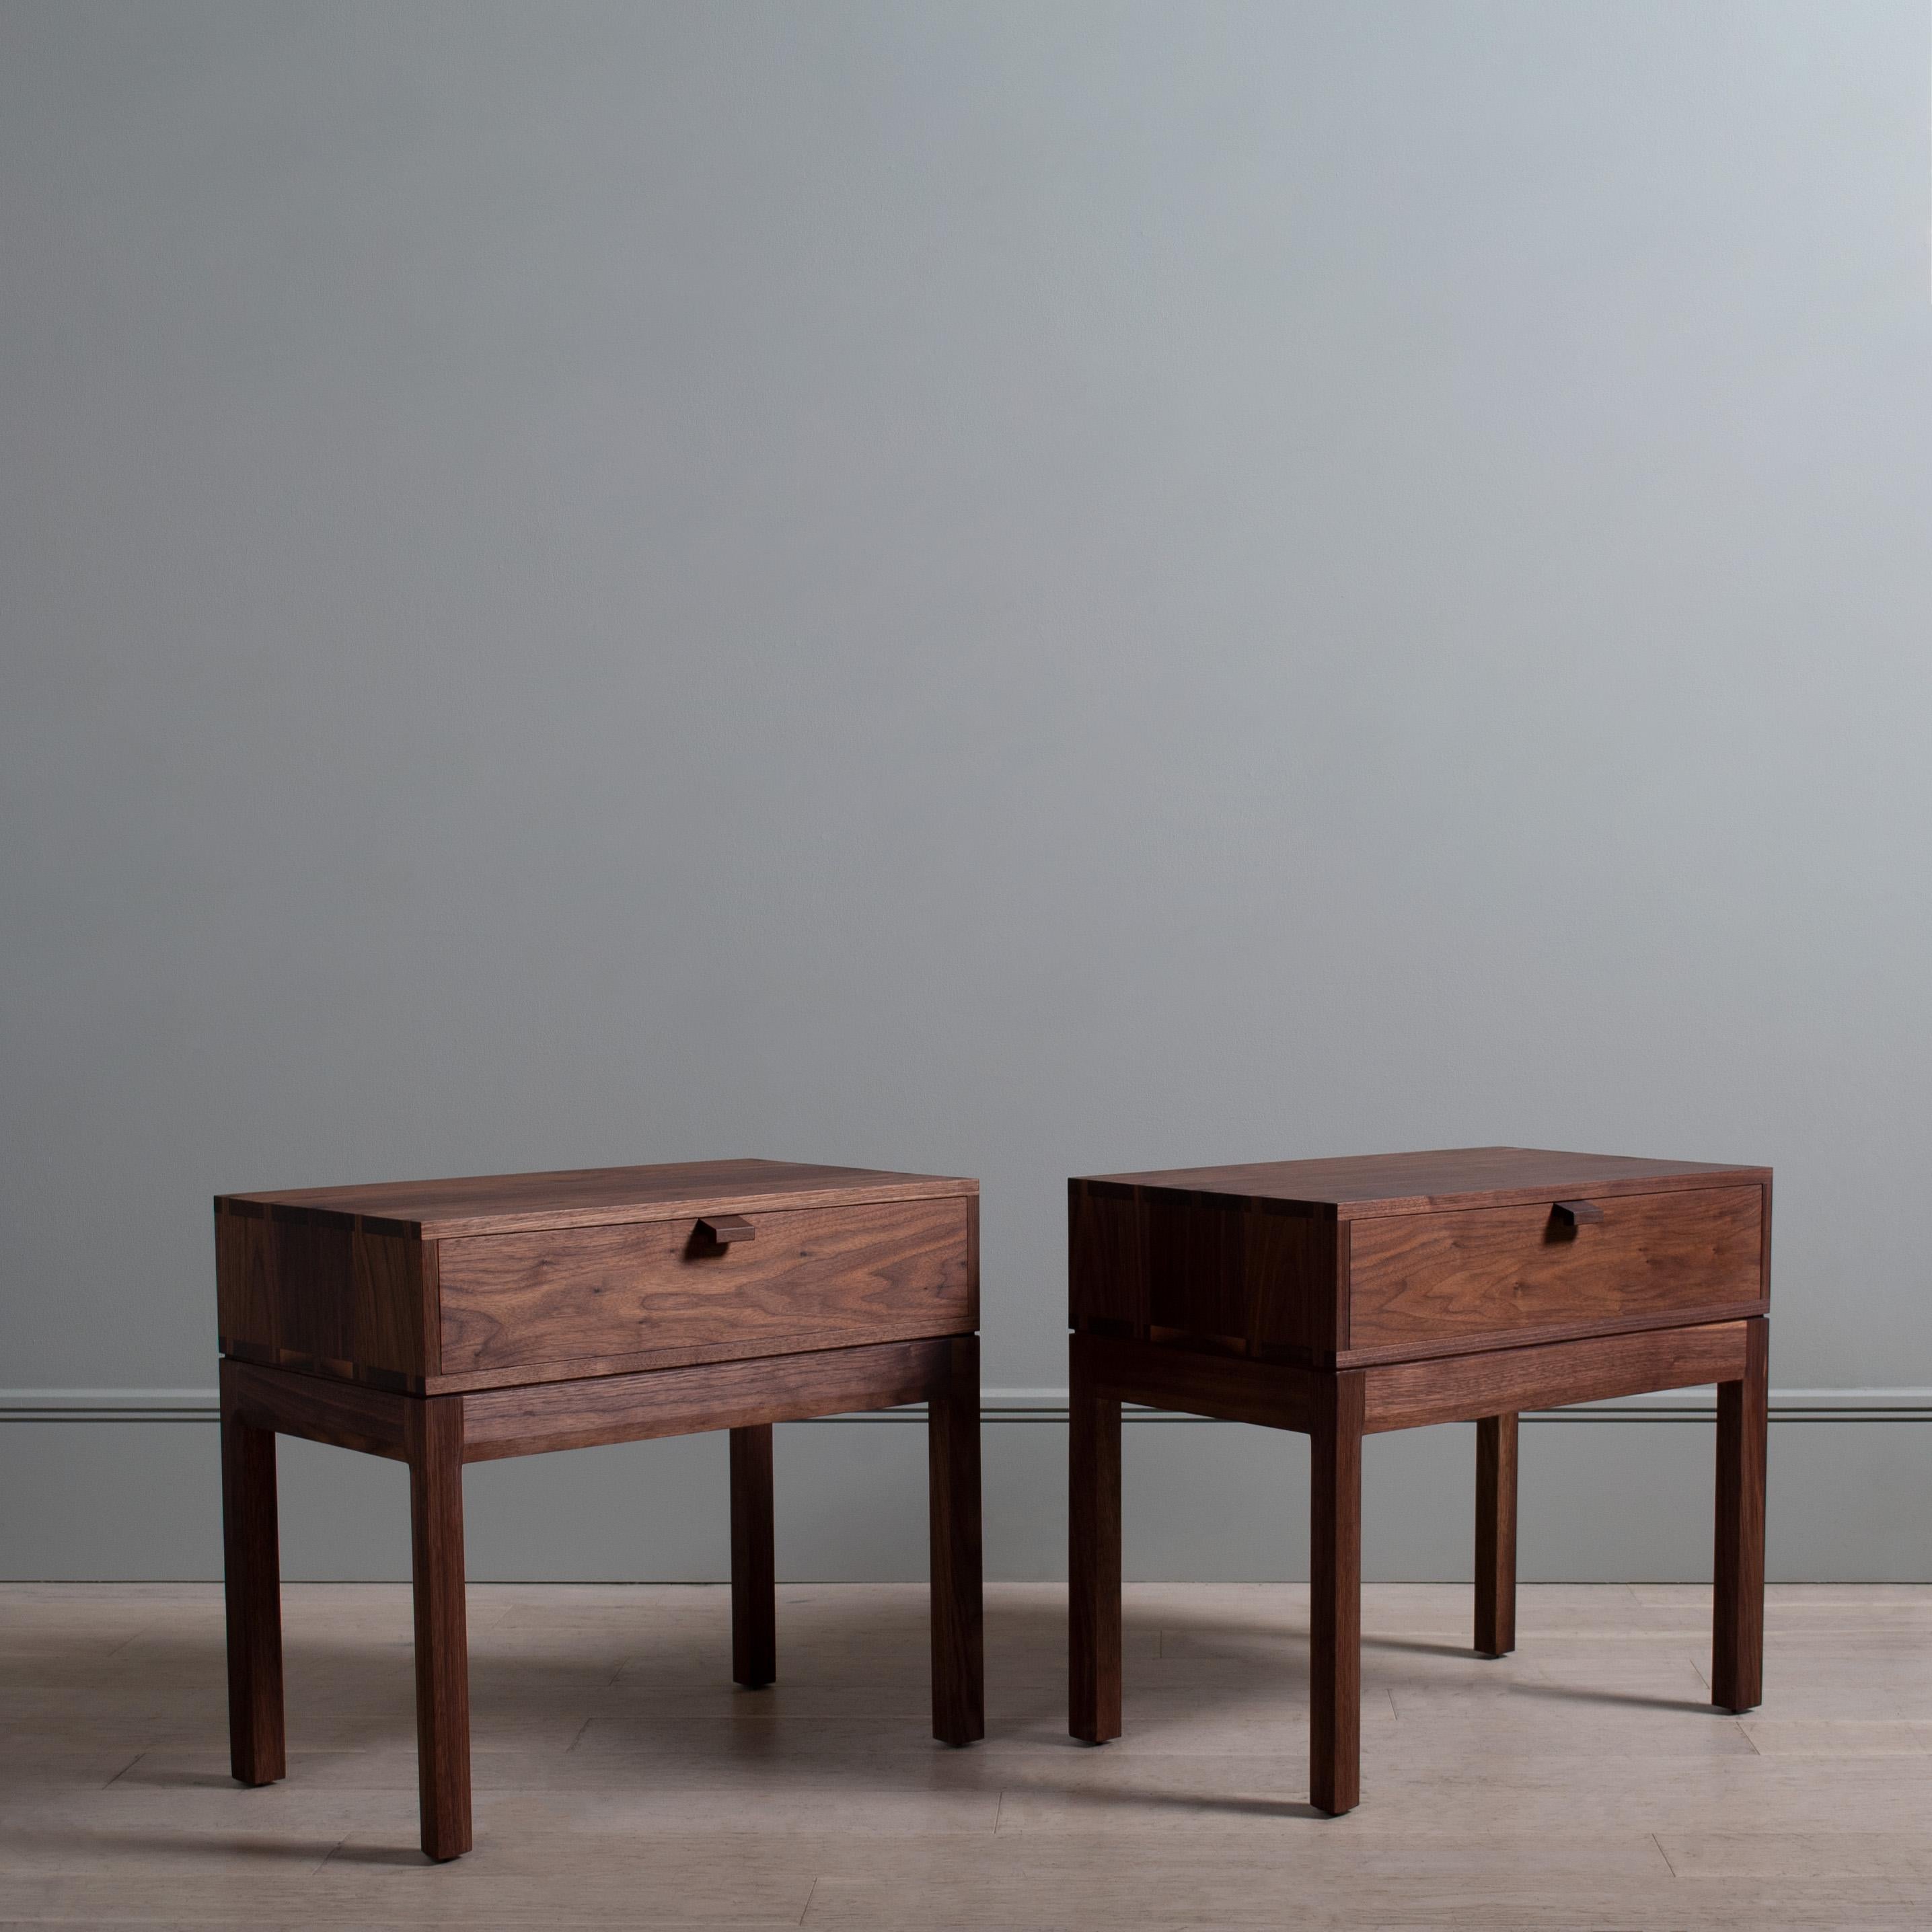 A pair of black walnut hand-crafted nightstands, or end tables, in the midcentury modernist style. Constructed from finest American black walnut with the inner dovetailed jointed drawer carcass in English Quartersawn Oak. The upper box is detailed